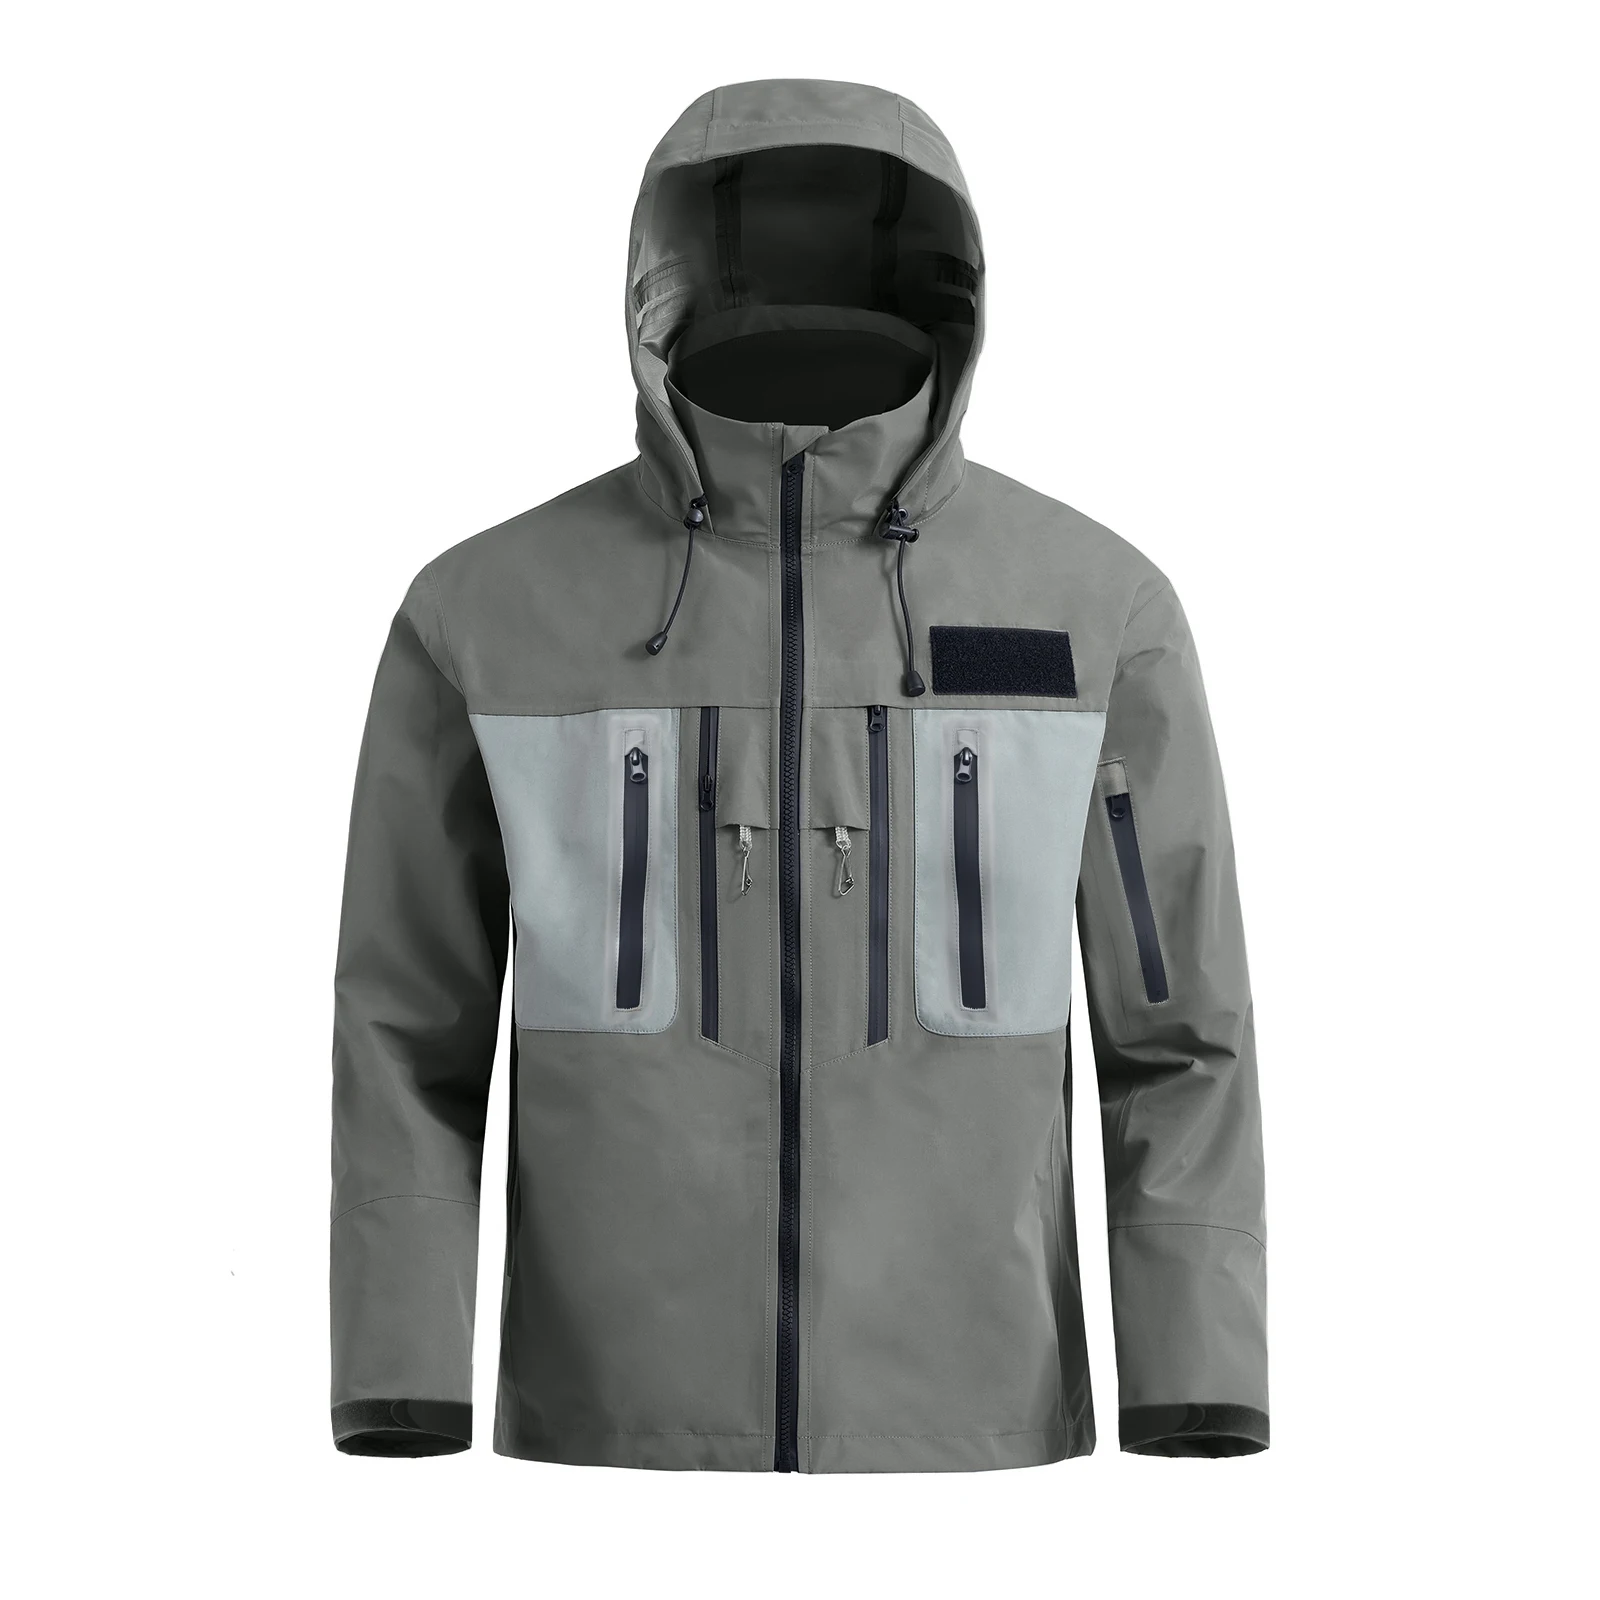 

Men's Jackets Fly Fishing Hiking Hunting Three Layers Of Waterproof Material With Hood FJ-29